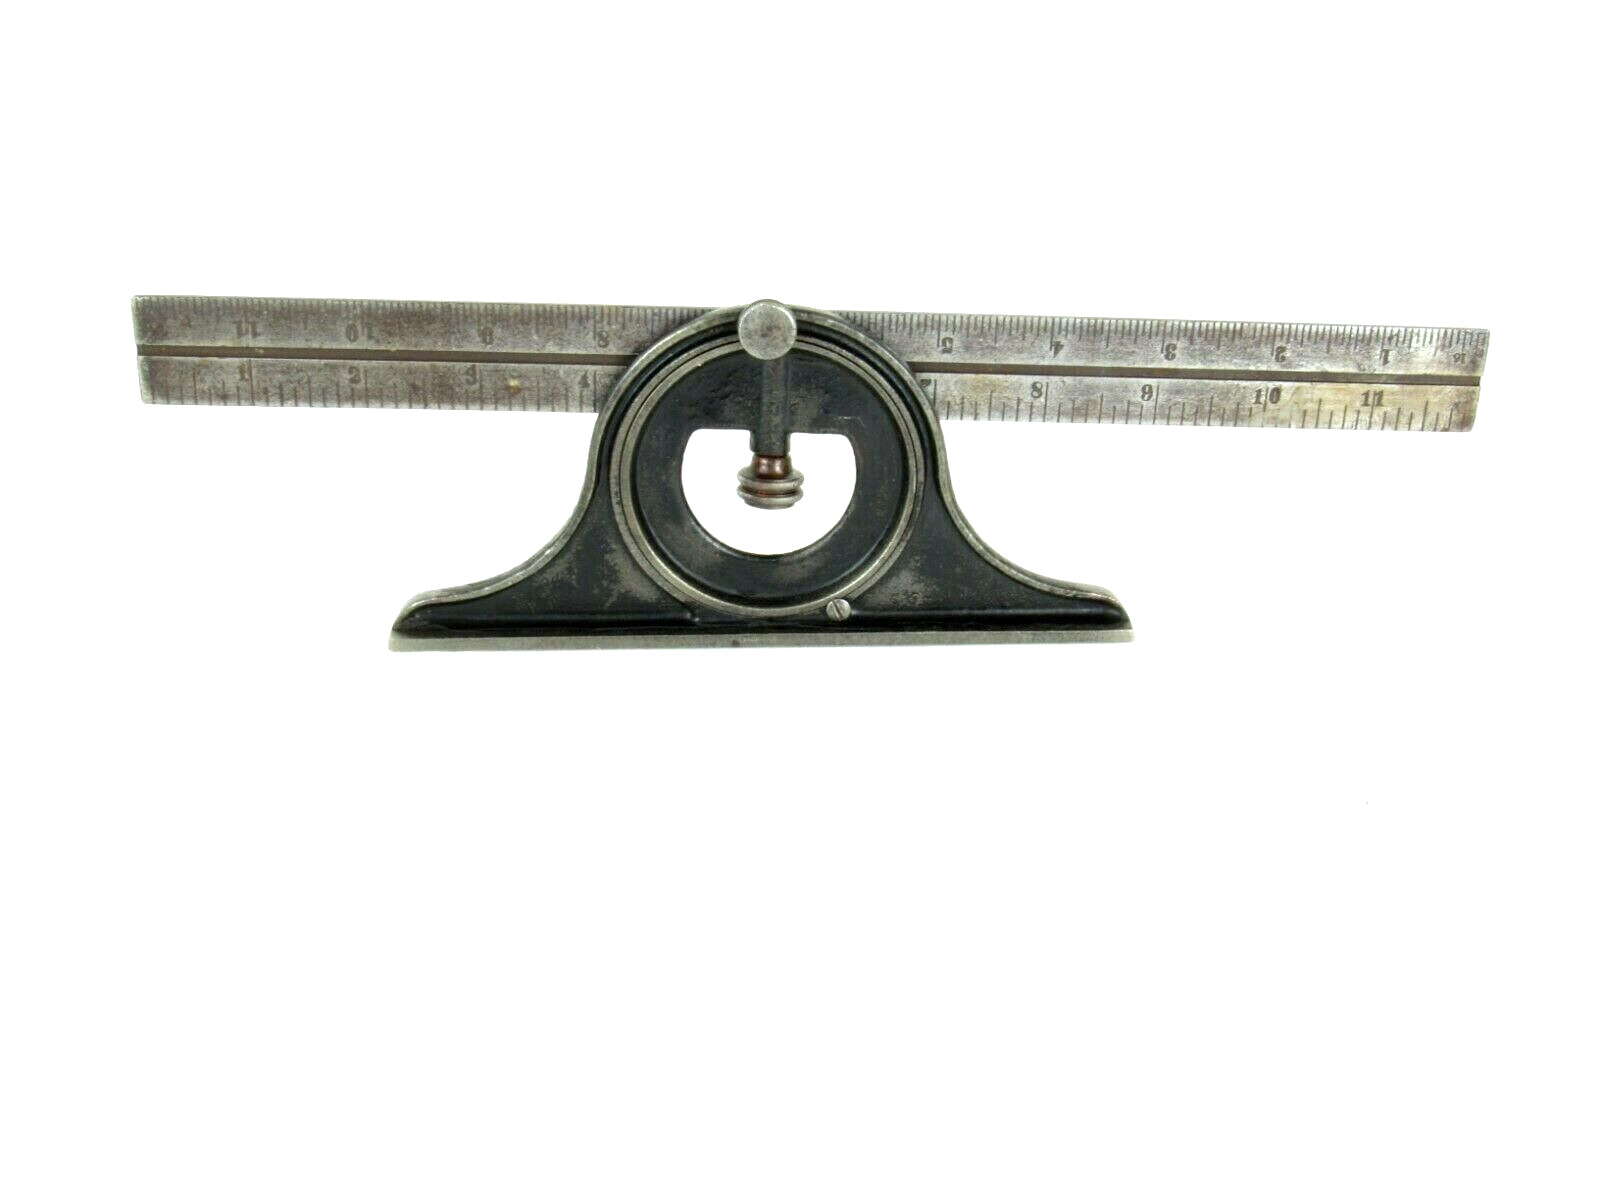 VERY EARLY THE L S S CO ATHOL MASS AUG 7 1872 PROTRACTOR HEAD STARRETT  RS100